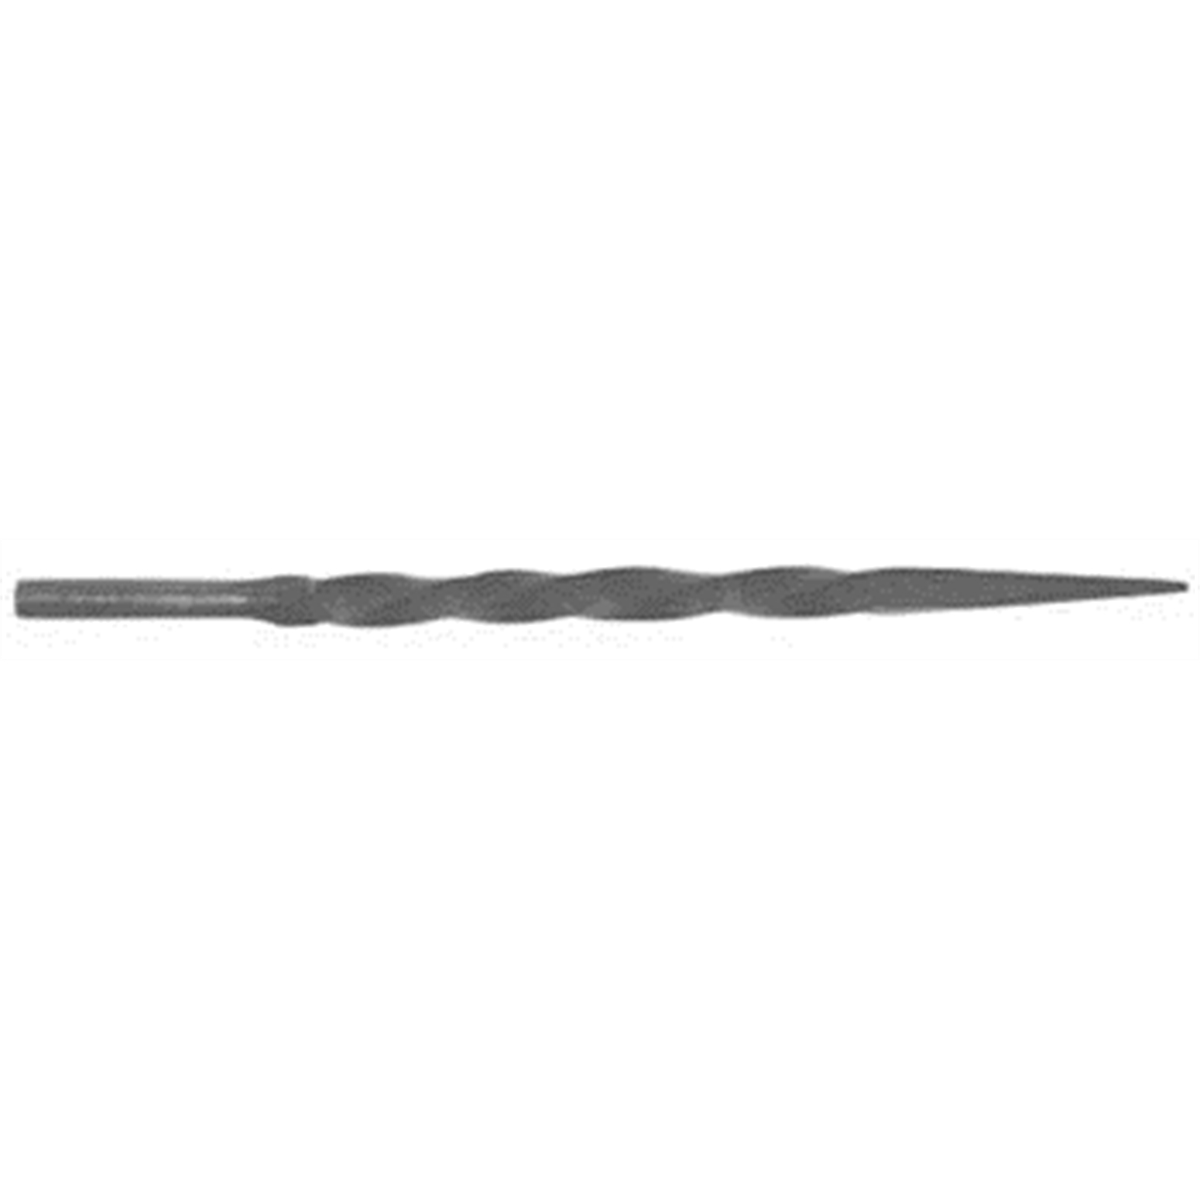 15712 Ball End Hex Key Wrench, 0.25 In.